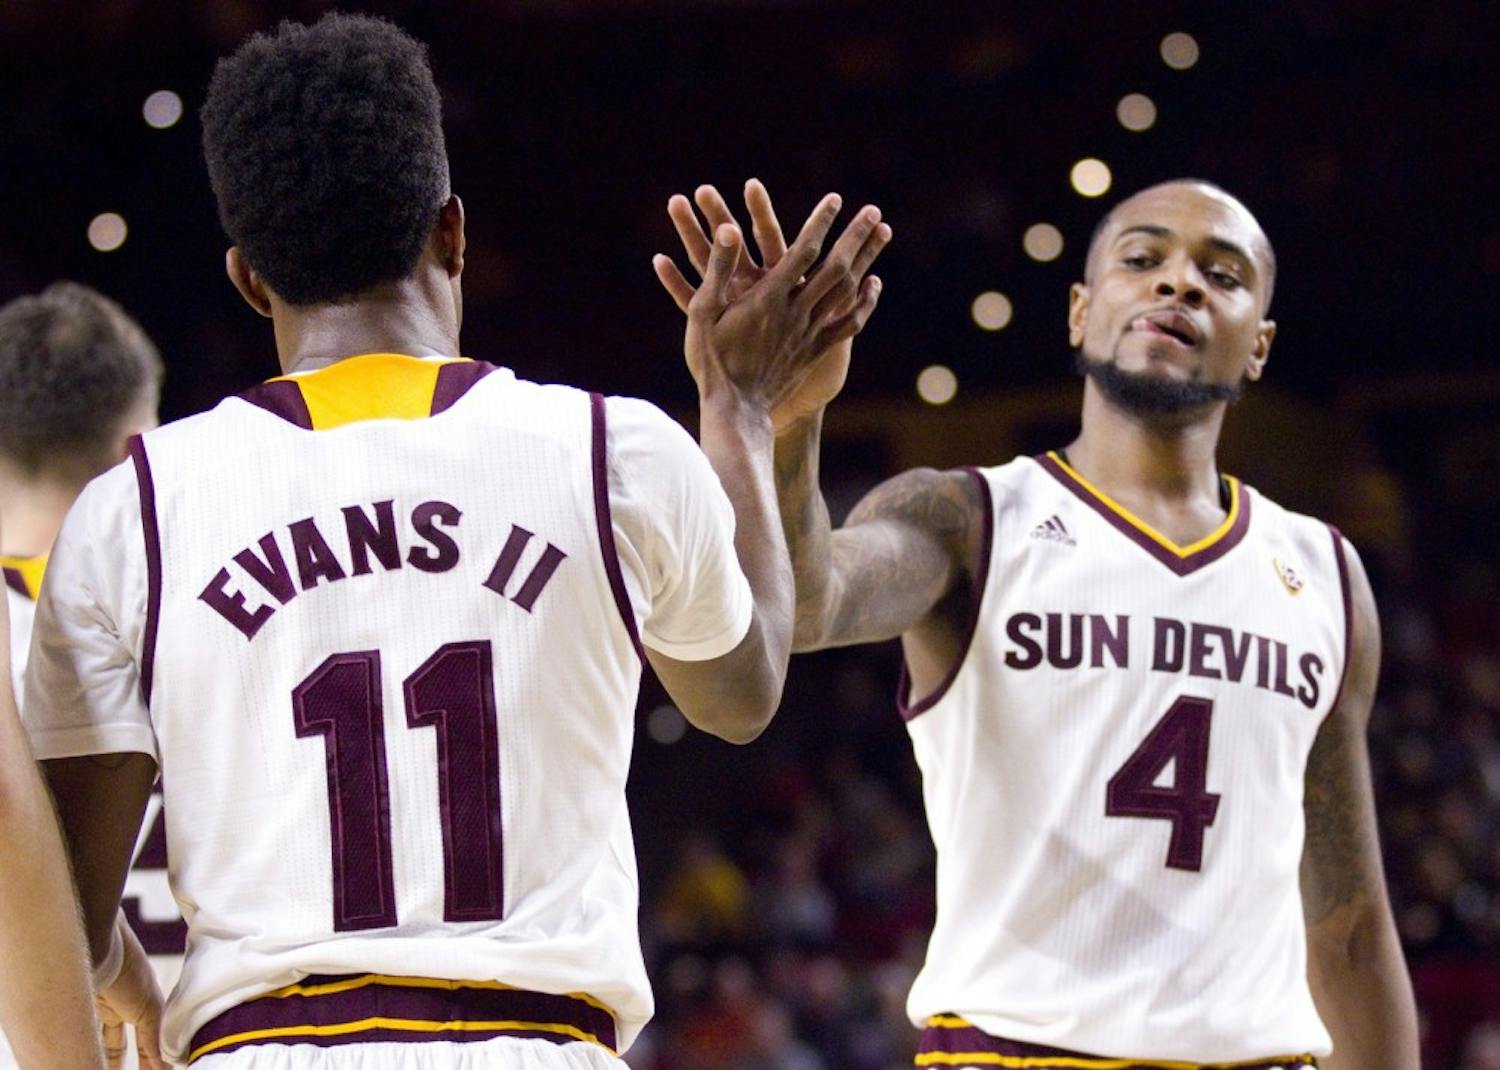 ASU junior guard Shannon Evans II (11) high-fives senior guard Torian Graham (4) after a play in the first half of a men's basketball game against the UNLV Runnin' Rebels in Wells Fargo Arena in Tempe, Arizona, on Saturday, Dec. 3, 2016. ASU won 97-73, putting them at 5-3 on the season.